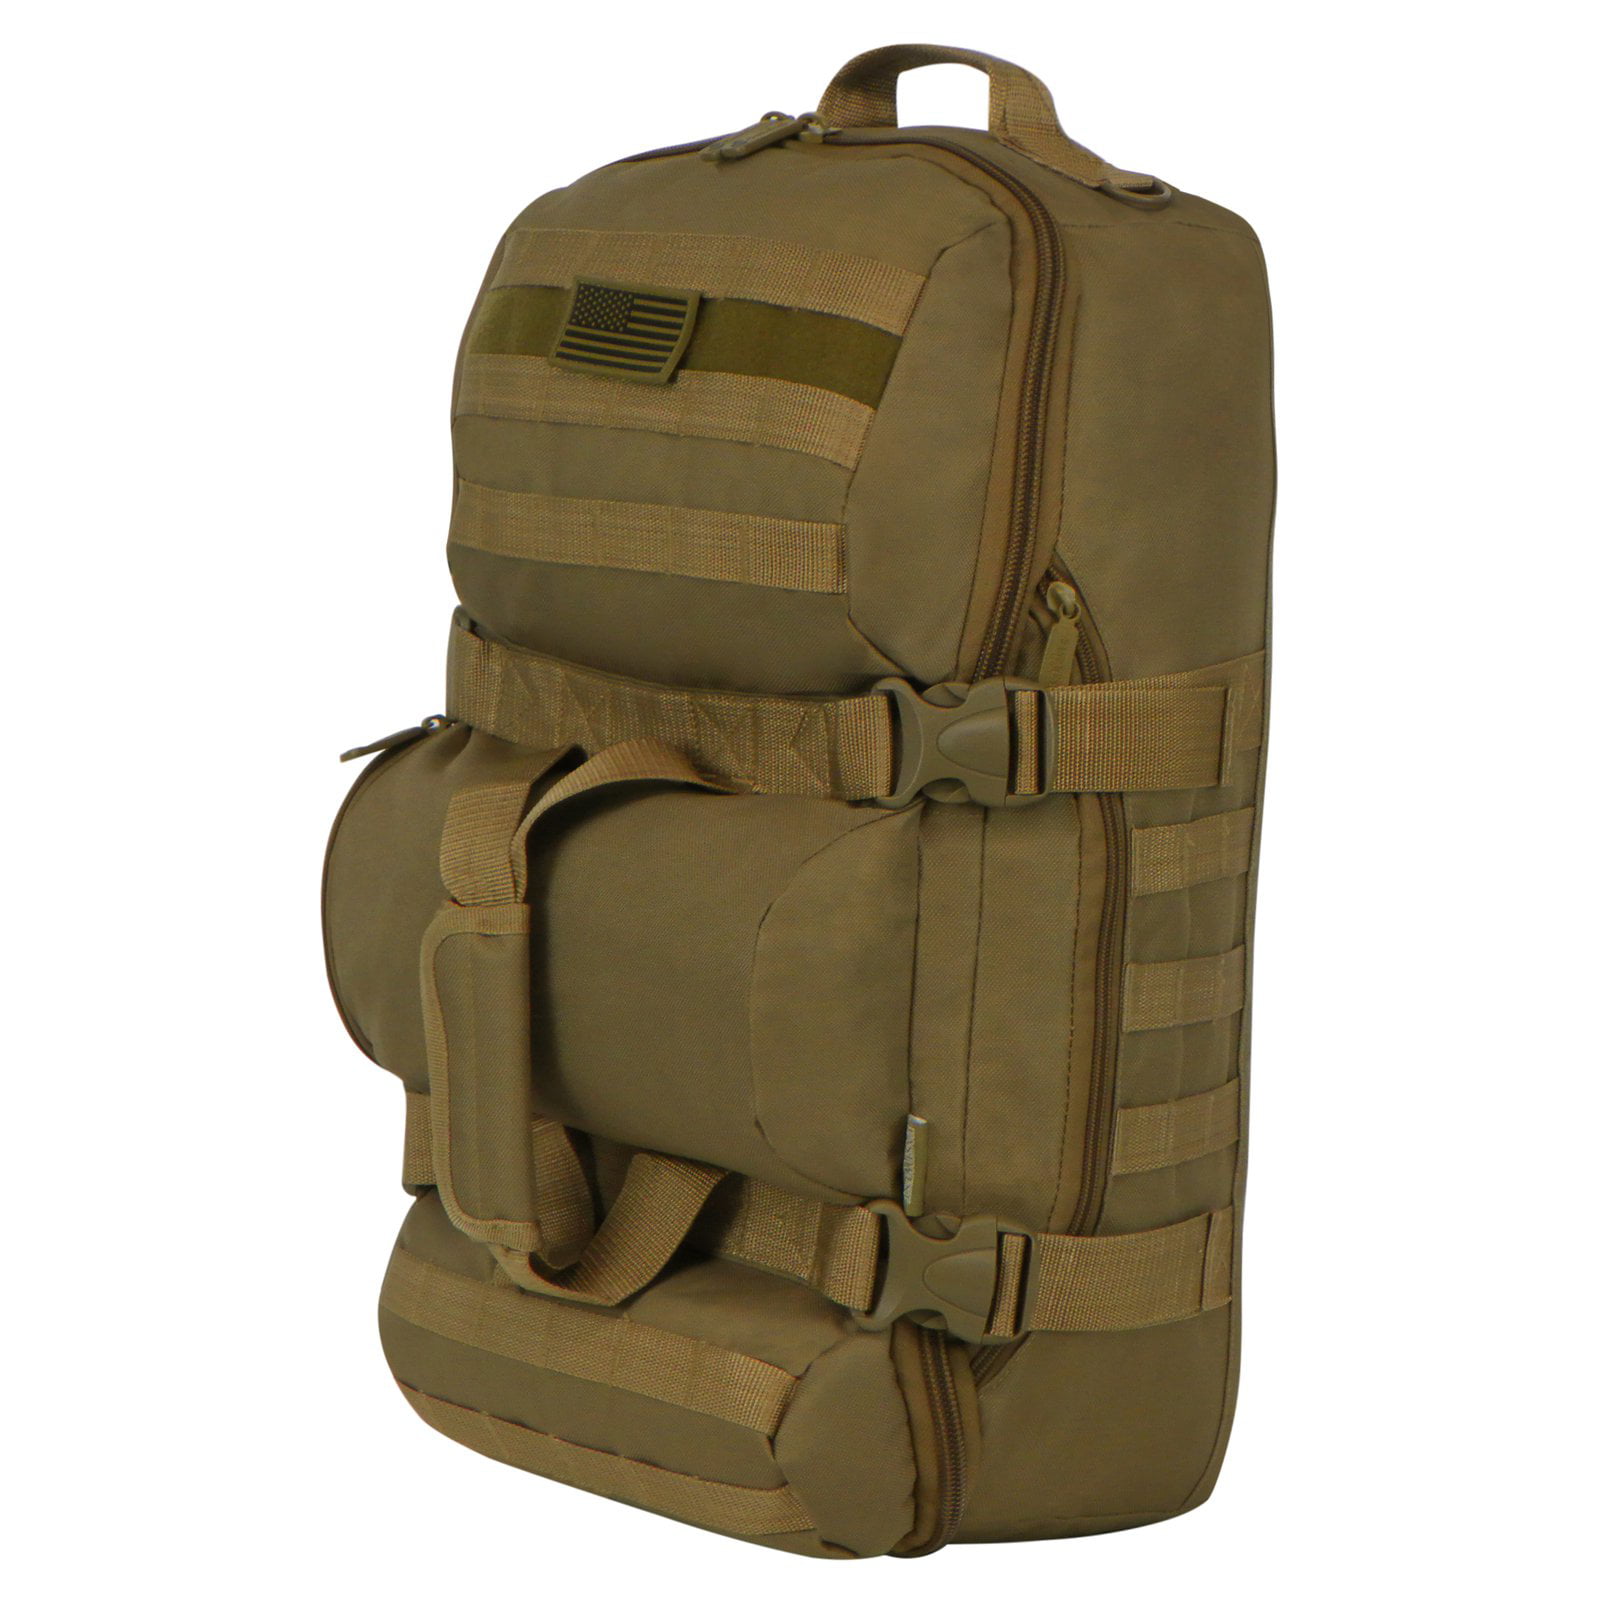 EastWest USA Tactical Over Shoulder MOLLE Attachable Military GO BAG OD GREEN 